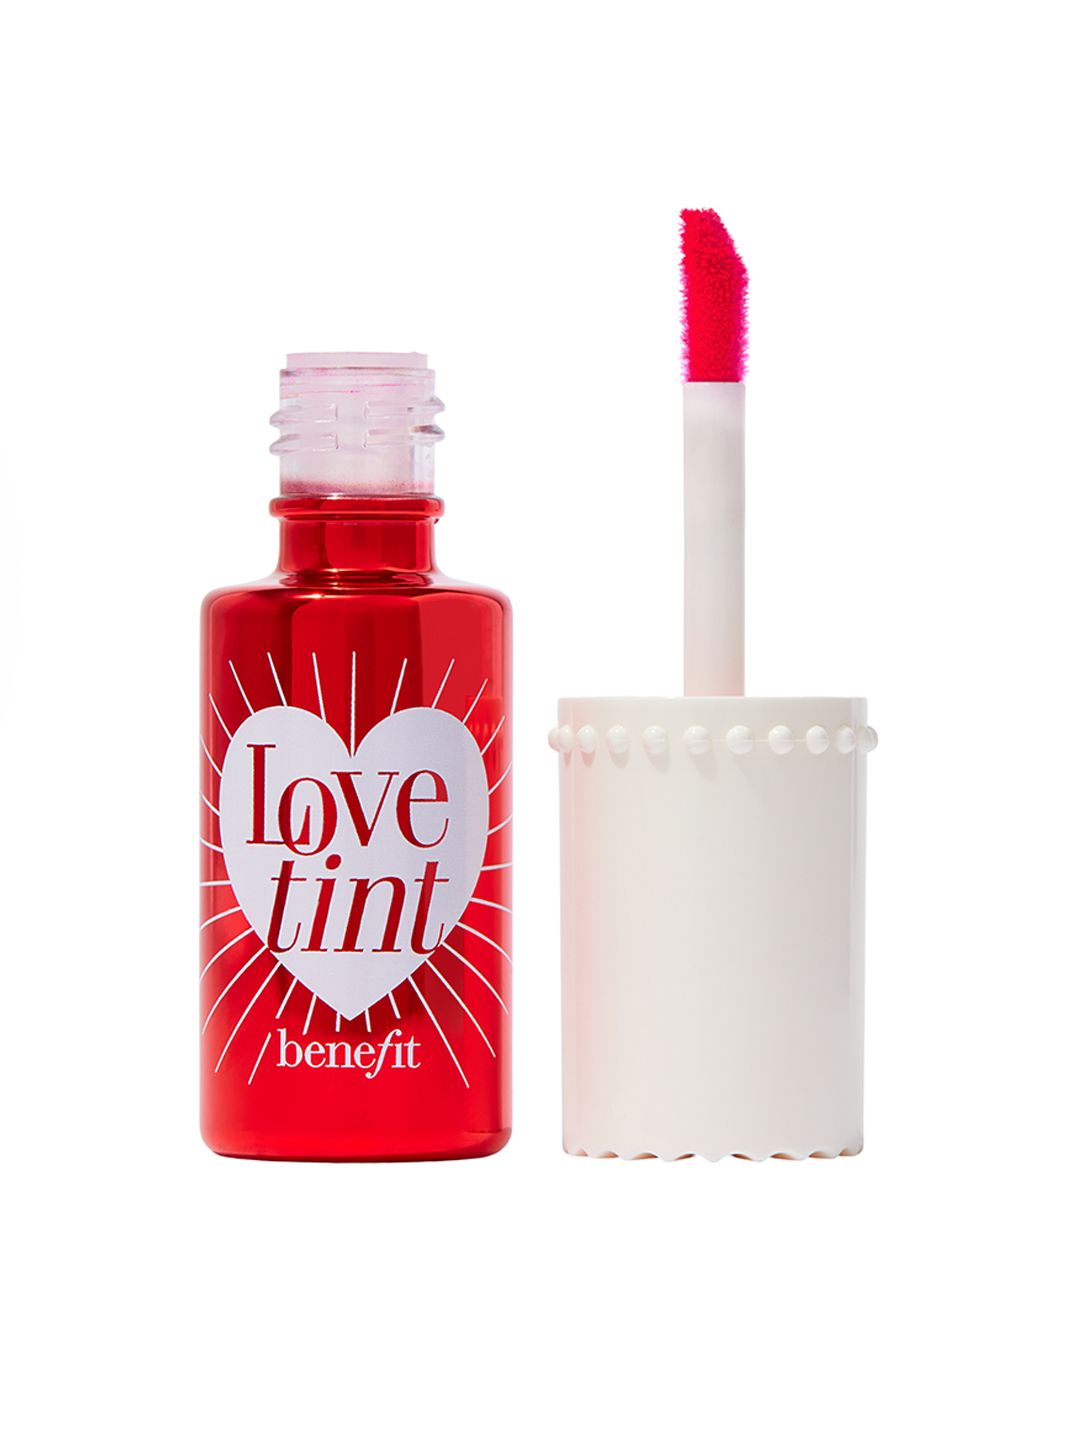 Benefit Cosmetics Lovetint Cheek & Lip Stain 6ml - Fiery Red Price in India